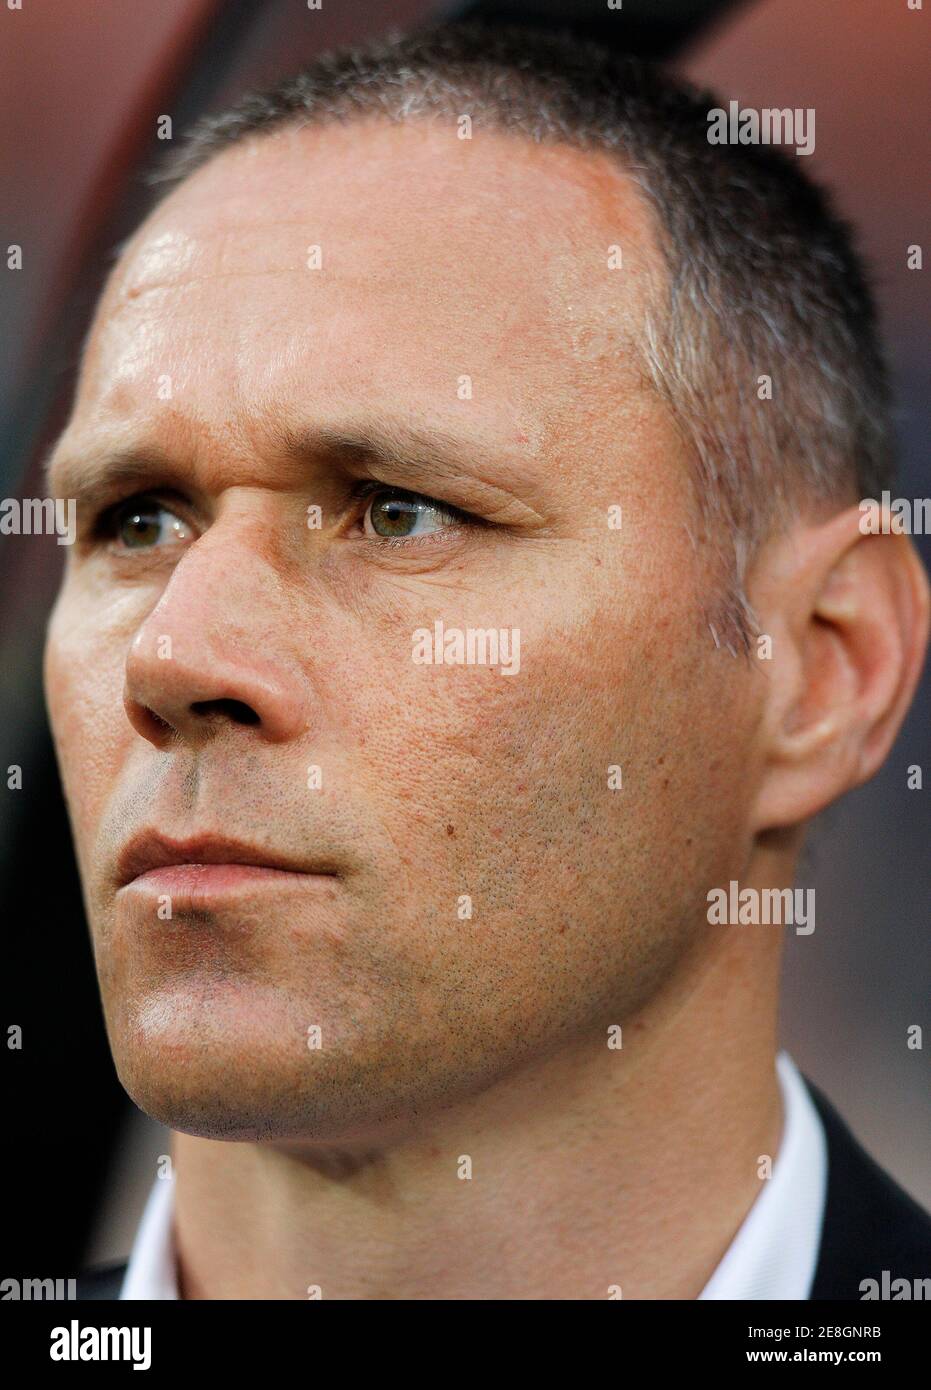 Coach Marco van Basten of the Netherlands is seen during a soccer friendly against Ukraine in preparation for Euro 2008 in Rotterdam May 24, 2008. Photo taken May 24, 2008.    REUTERS/Jerry Lampen (NETHERLANDS)(EURO 2008 Preview) Stock Photo